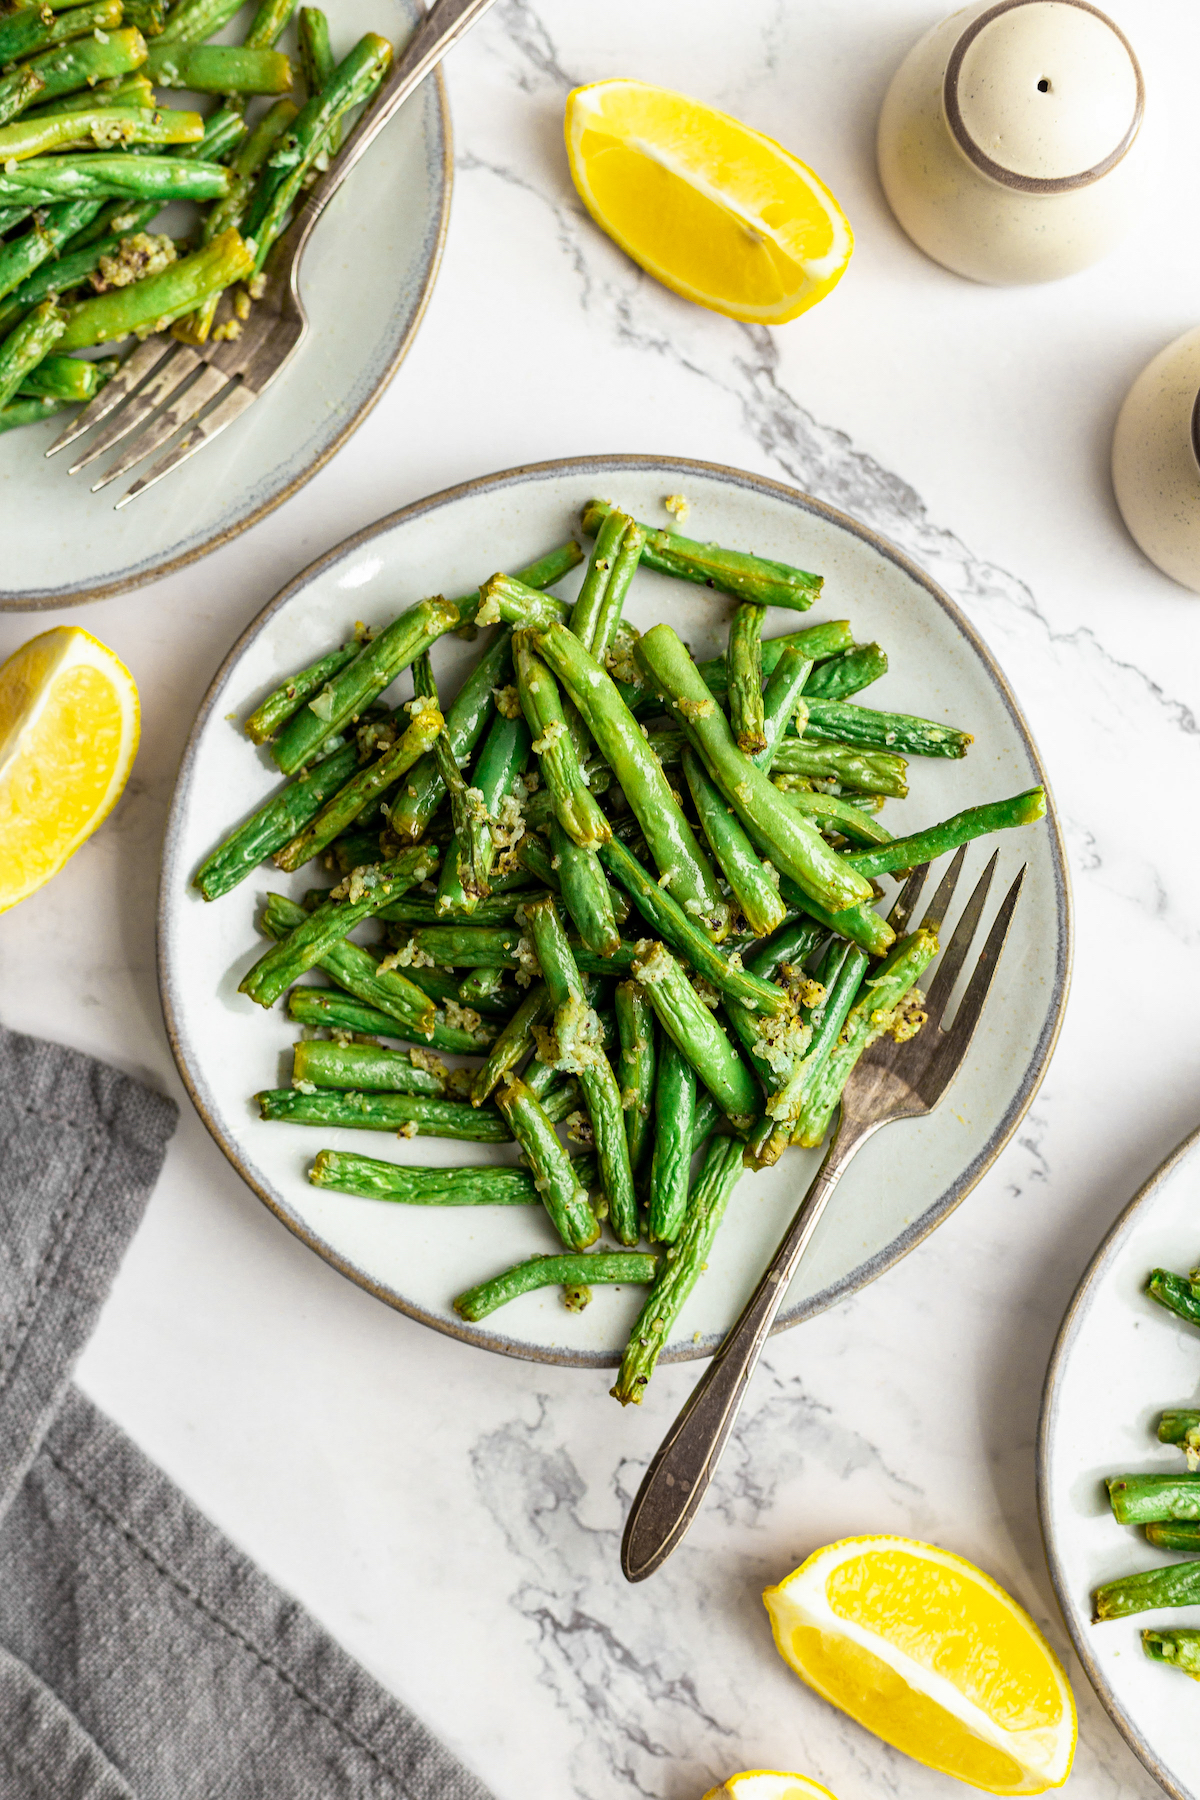 Air fryer green beans on a dinner plate with a fork. Lemon wedges and other plates of green beans are arranged artistically on the table.